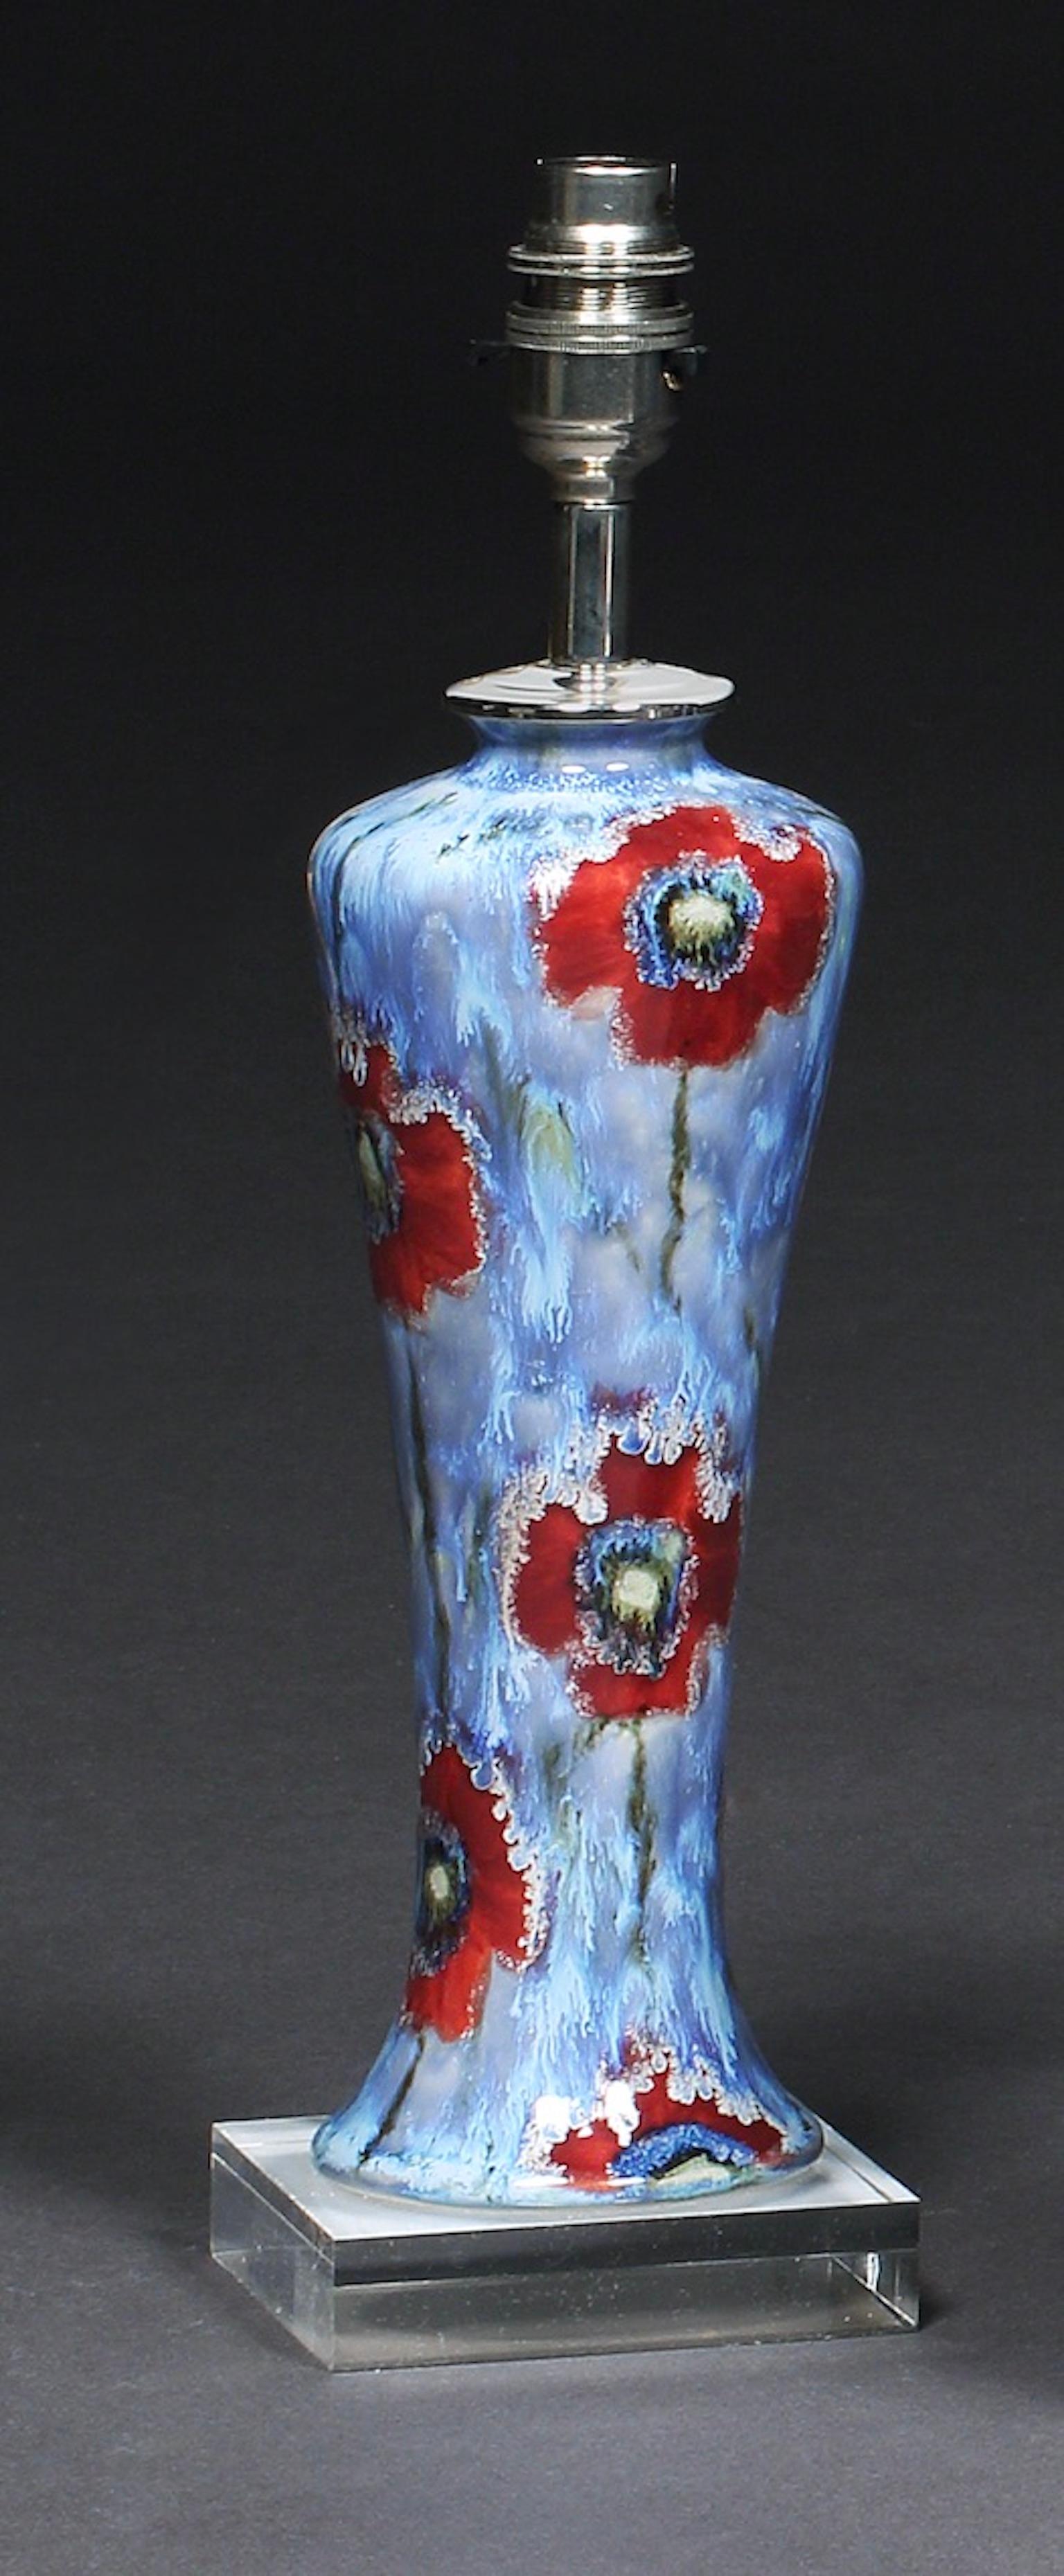 Cobridge, poppy and ice pattern, hand painted vase converted into a table lamp on a perspex base, 10½ “ high
One of Cobridge Pottery’s most popular patterns, designed by artist Anita Harris, leading designer at Cobridge, Moorcroft & her own studio